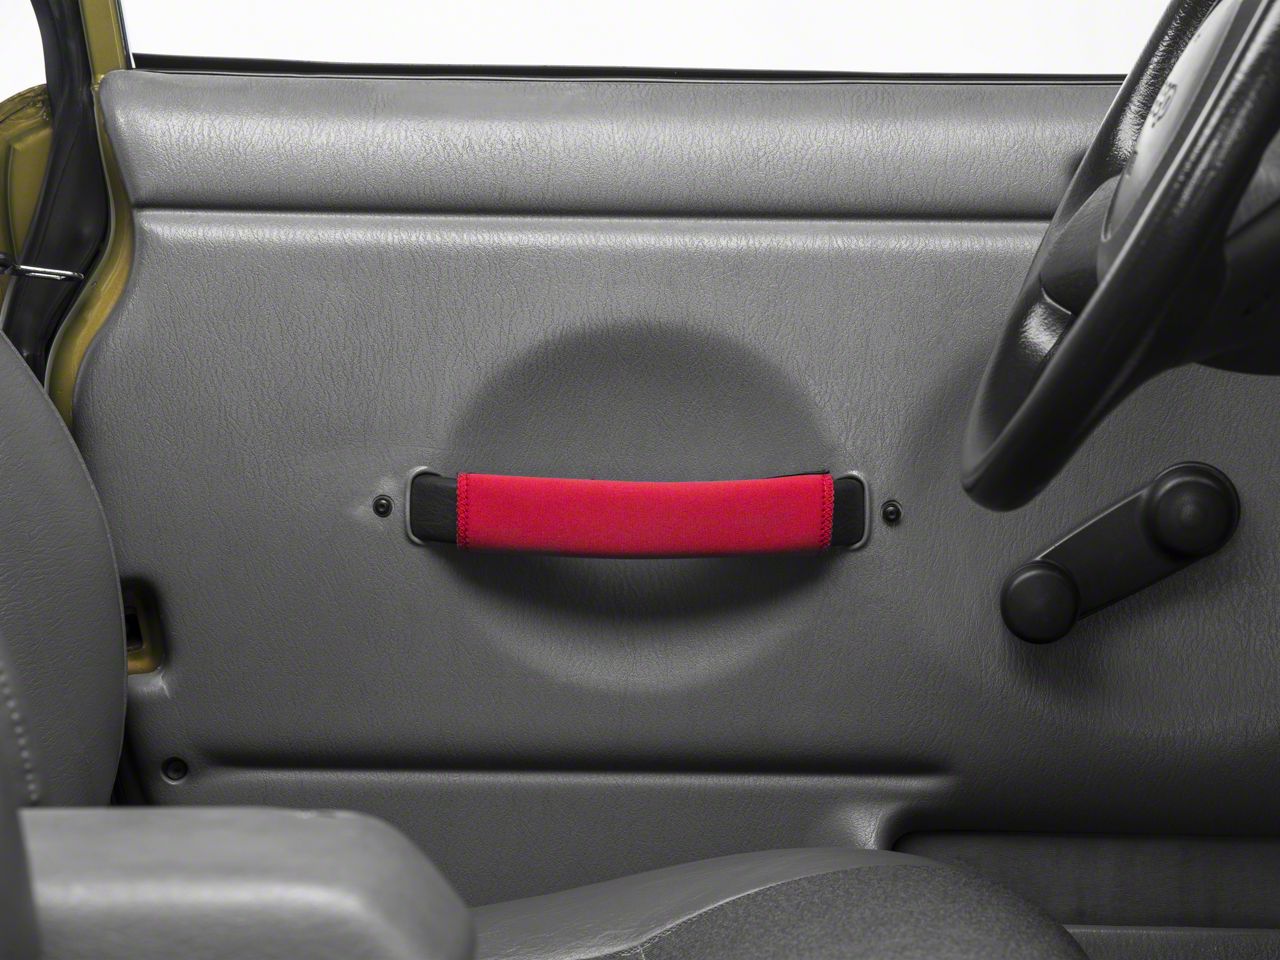 Jeep Wrangler Tj 97-06 New Grab Handle Cover Kit Red  X 13305.53